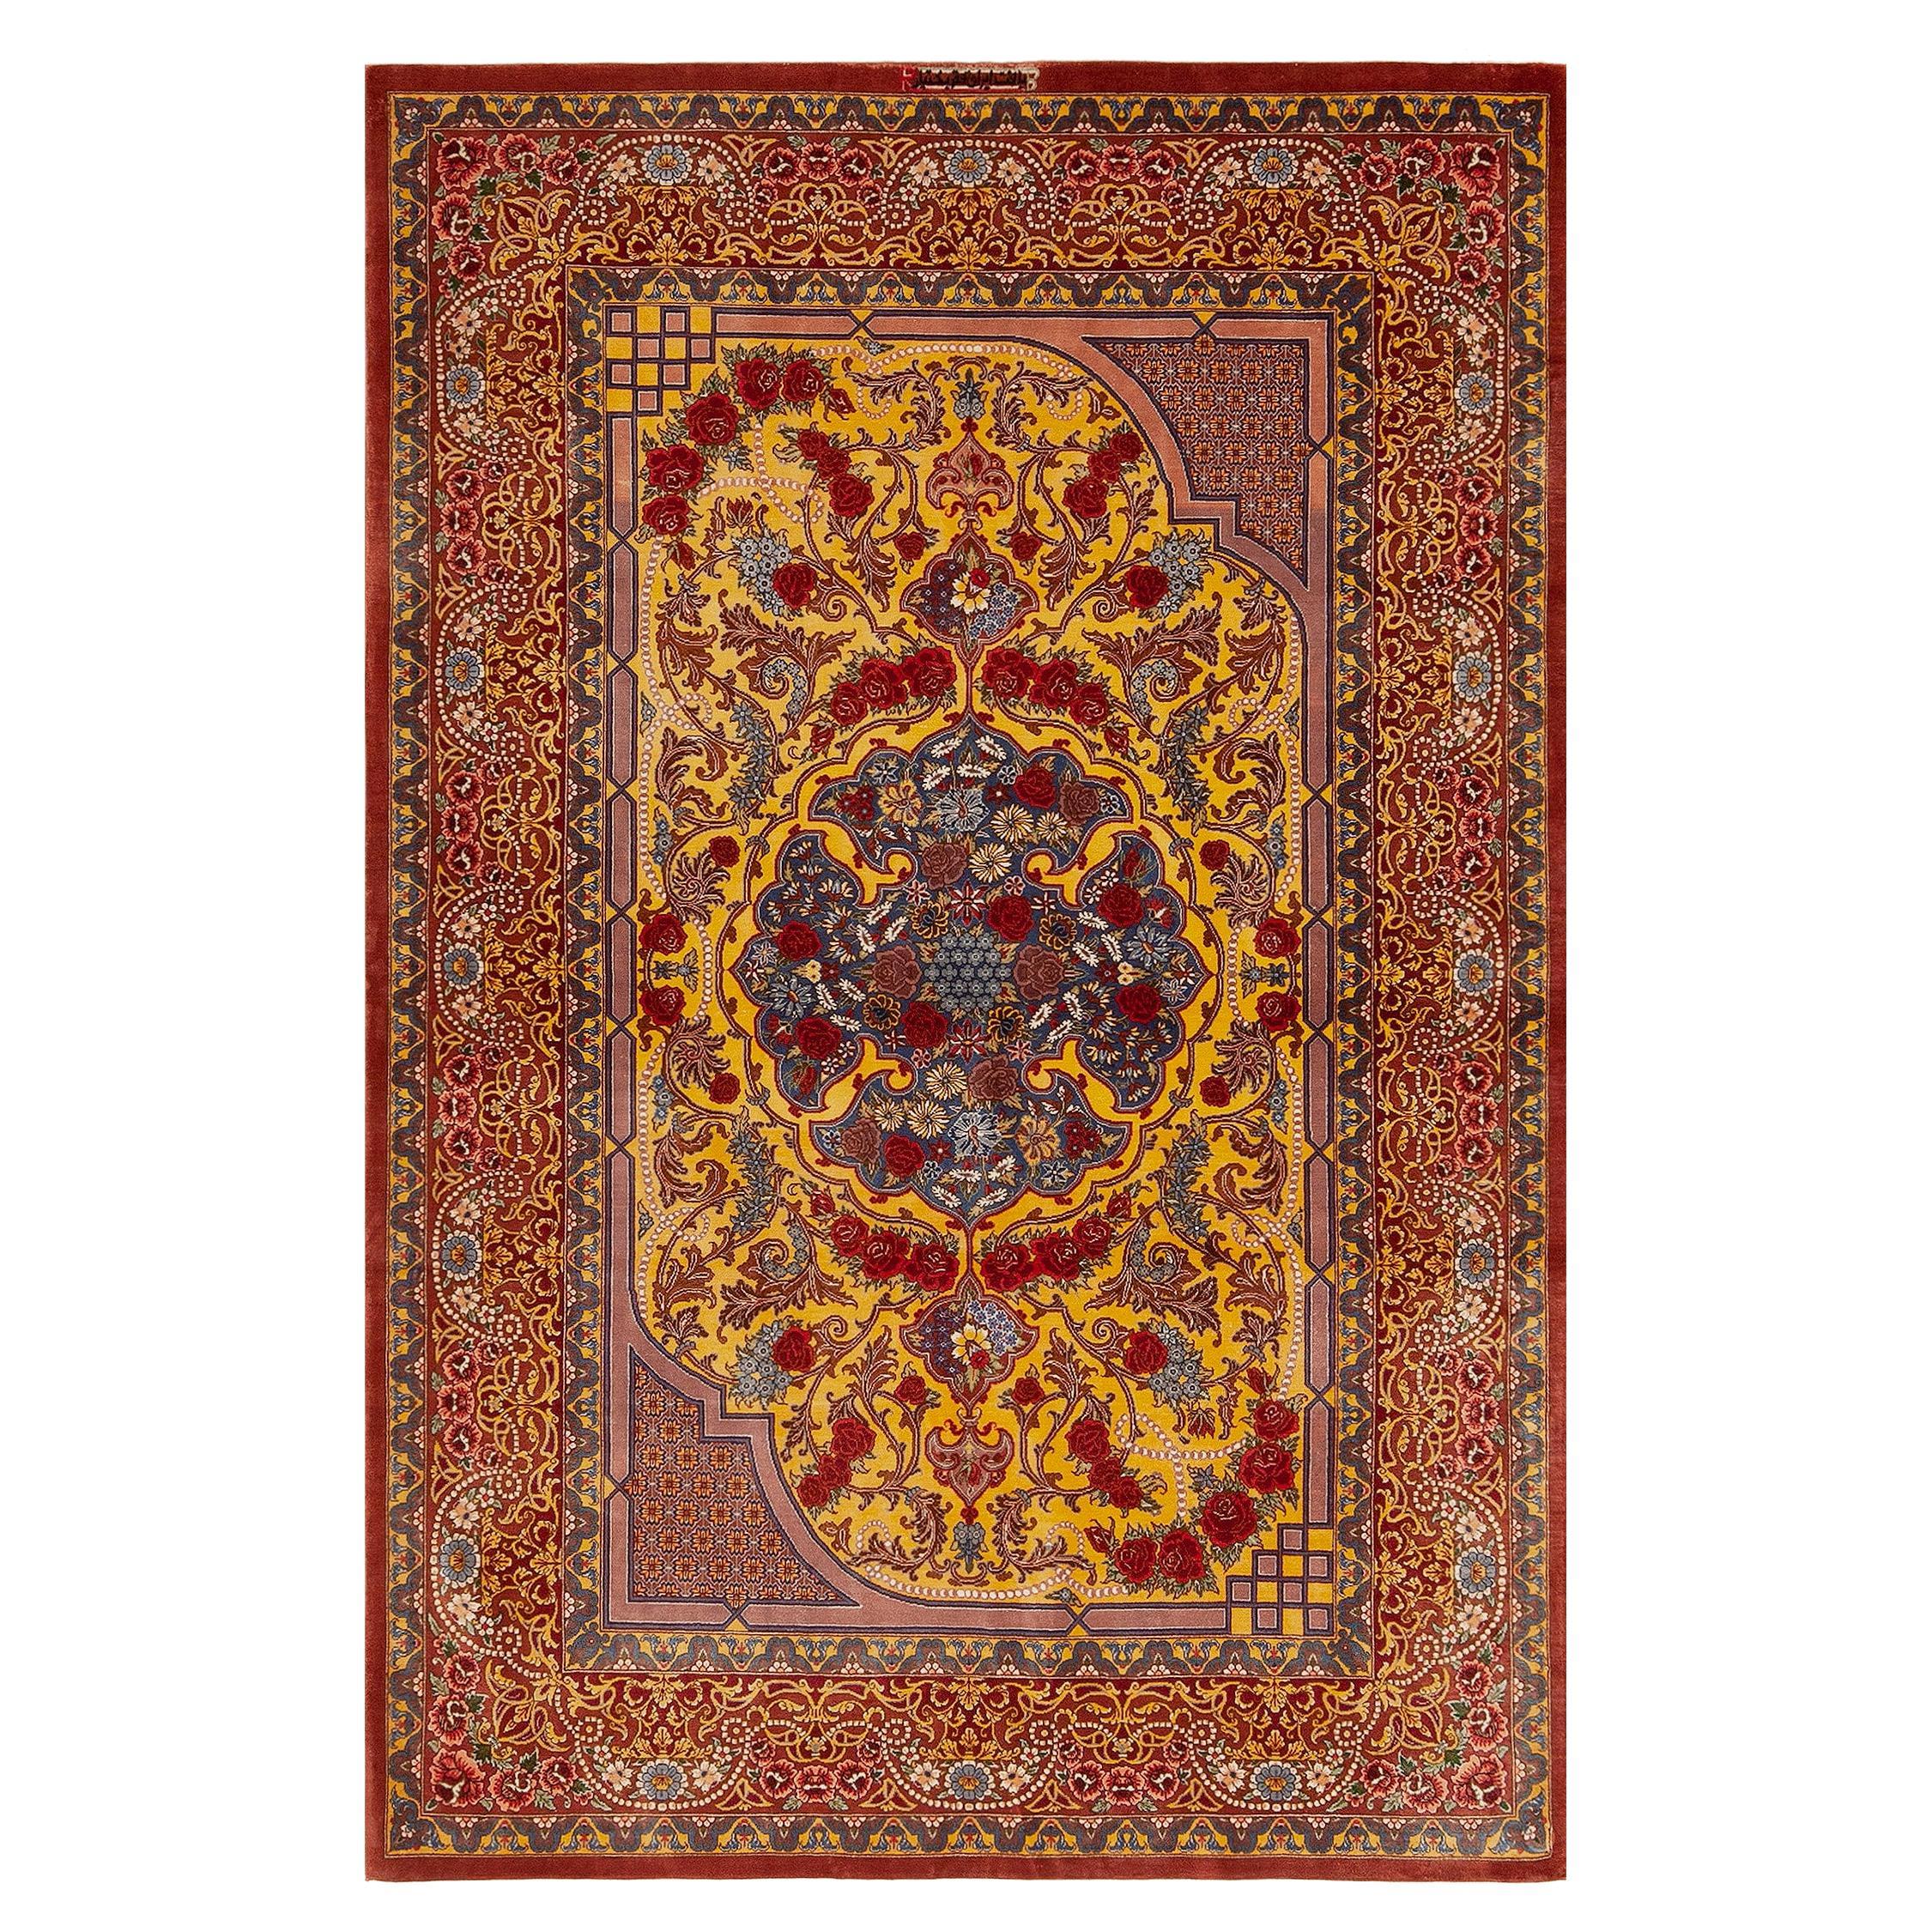 Fine Small Artistic Gold Color Luxurious Vintage Persian Silk Qum Rug 3'4" x 5' For Sale